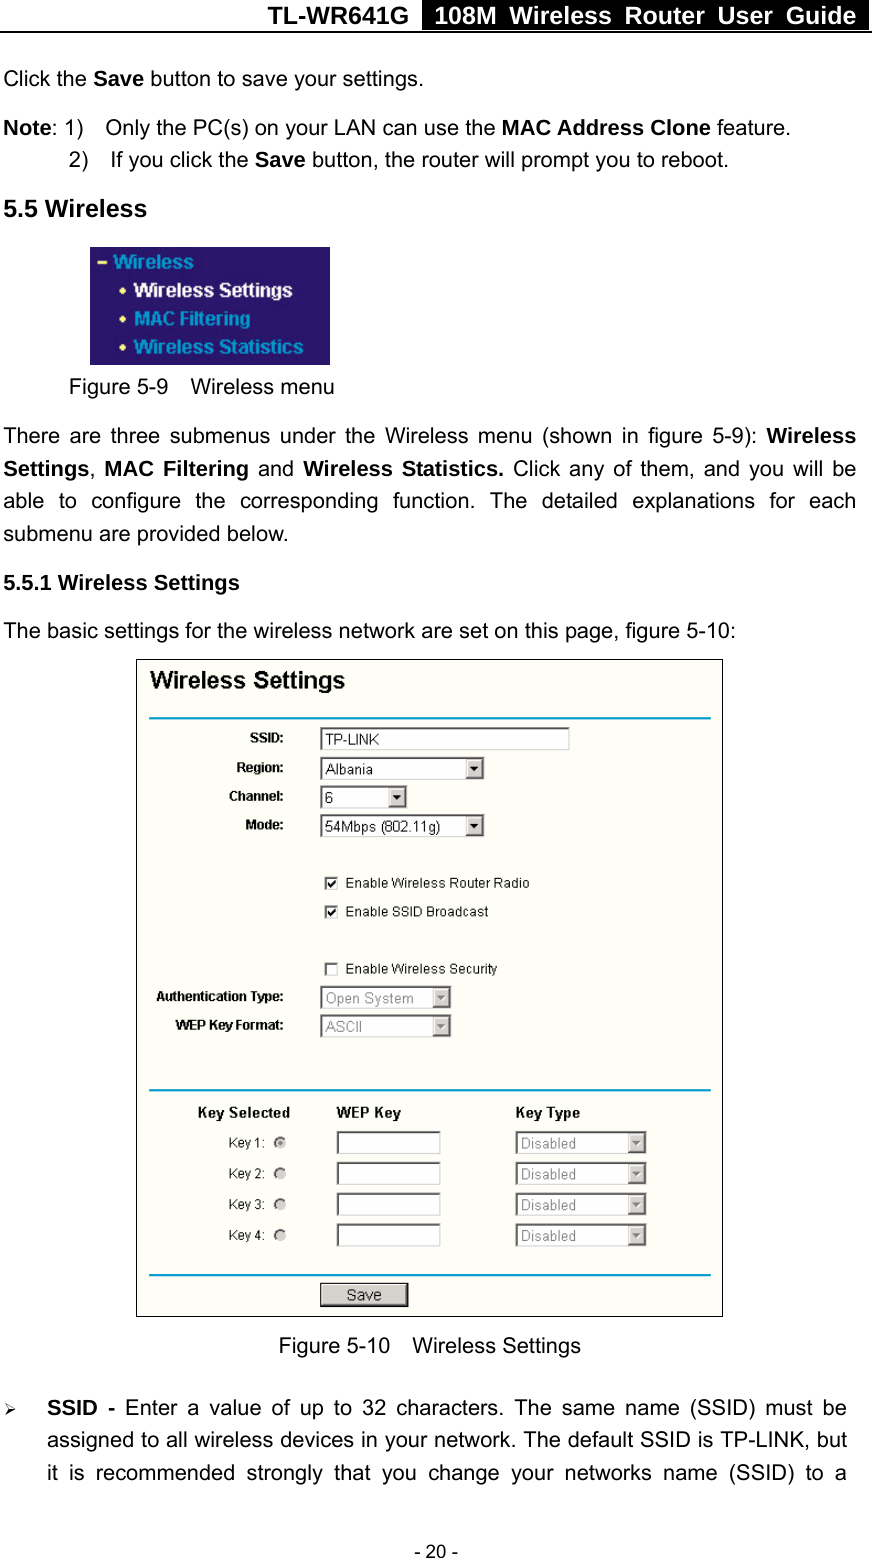 TL-WR641G   108M Wireless Router User Guide   - 20 -Click the Save button to save your settings. Note: 1)    Only the PC(s) on your LAN can use the MAC Address Clone feature. 2)  If you click the Save button, the router will prompt you to reboot. 5.5 Wireless  Figure 5-9  Wireless menu There are three submenus under the Wireless menu (shown in figure 5-9): Wireless Settings, MAC Filtering and Wireless Statistics. Click any of them, and you will be able to configure the corresponding function. The detailed explanations for each submenu are provided below. 5.5.1 Wireless Settings The basic settings for the wireless network are set on this page, figure 5-10:  Figure 5-10  Wireless Settings ¾ SSID - Enter a value of up to 32 characters. The same name (SSID) must be assigned to all wireless devices in your network. The default SSID is TP-LINK, but it is recommended strongly that you change your networks name (SSID) to a 